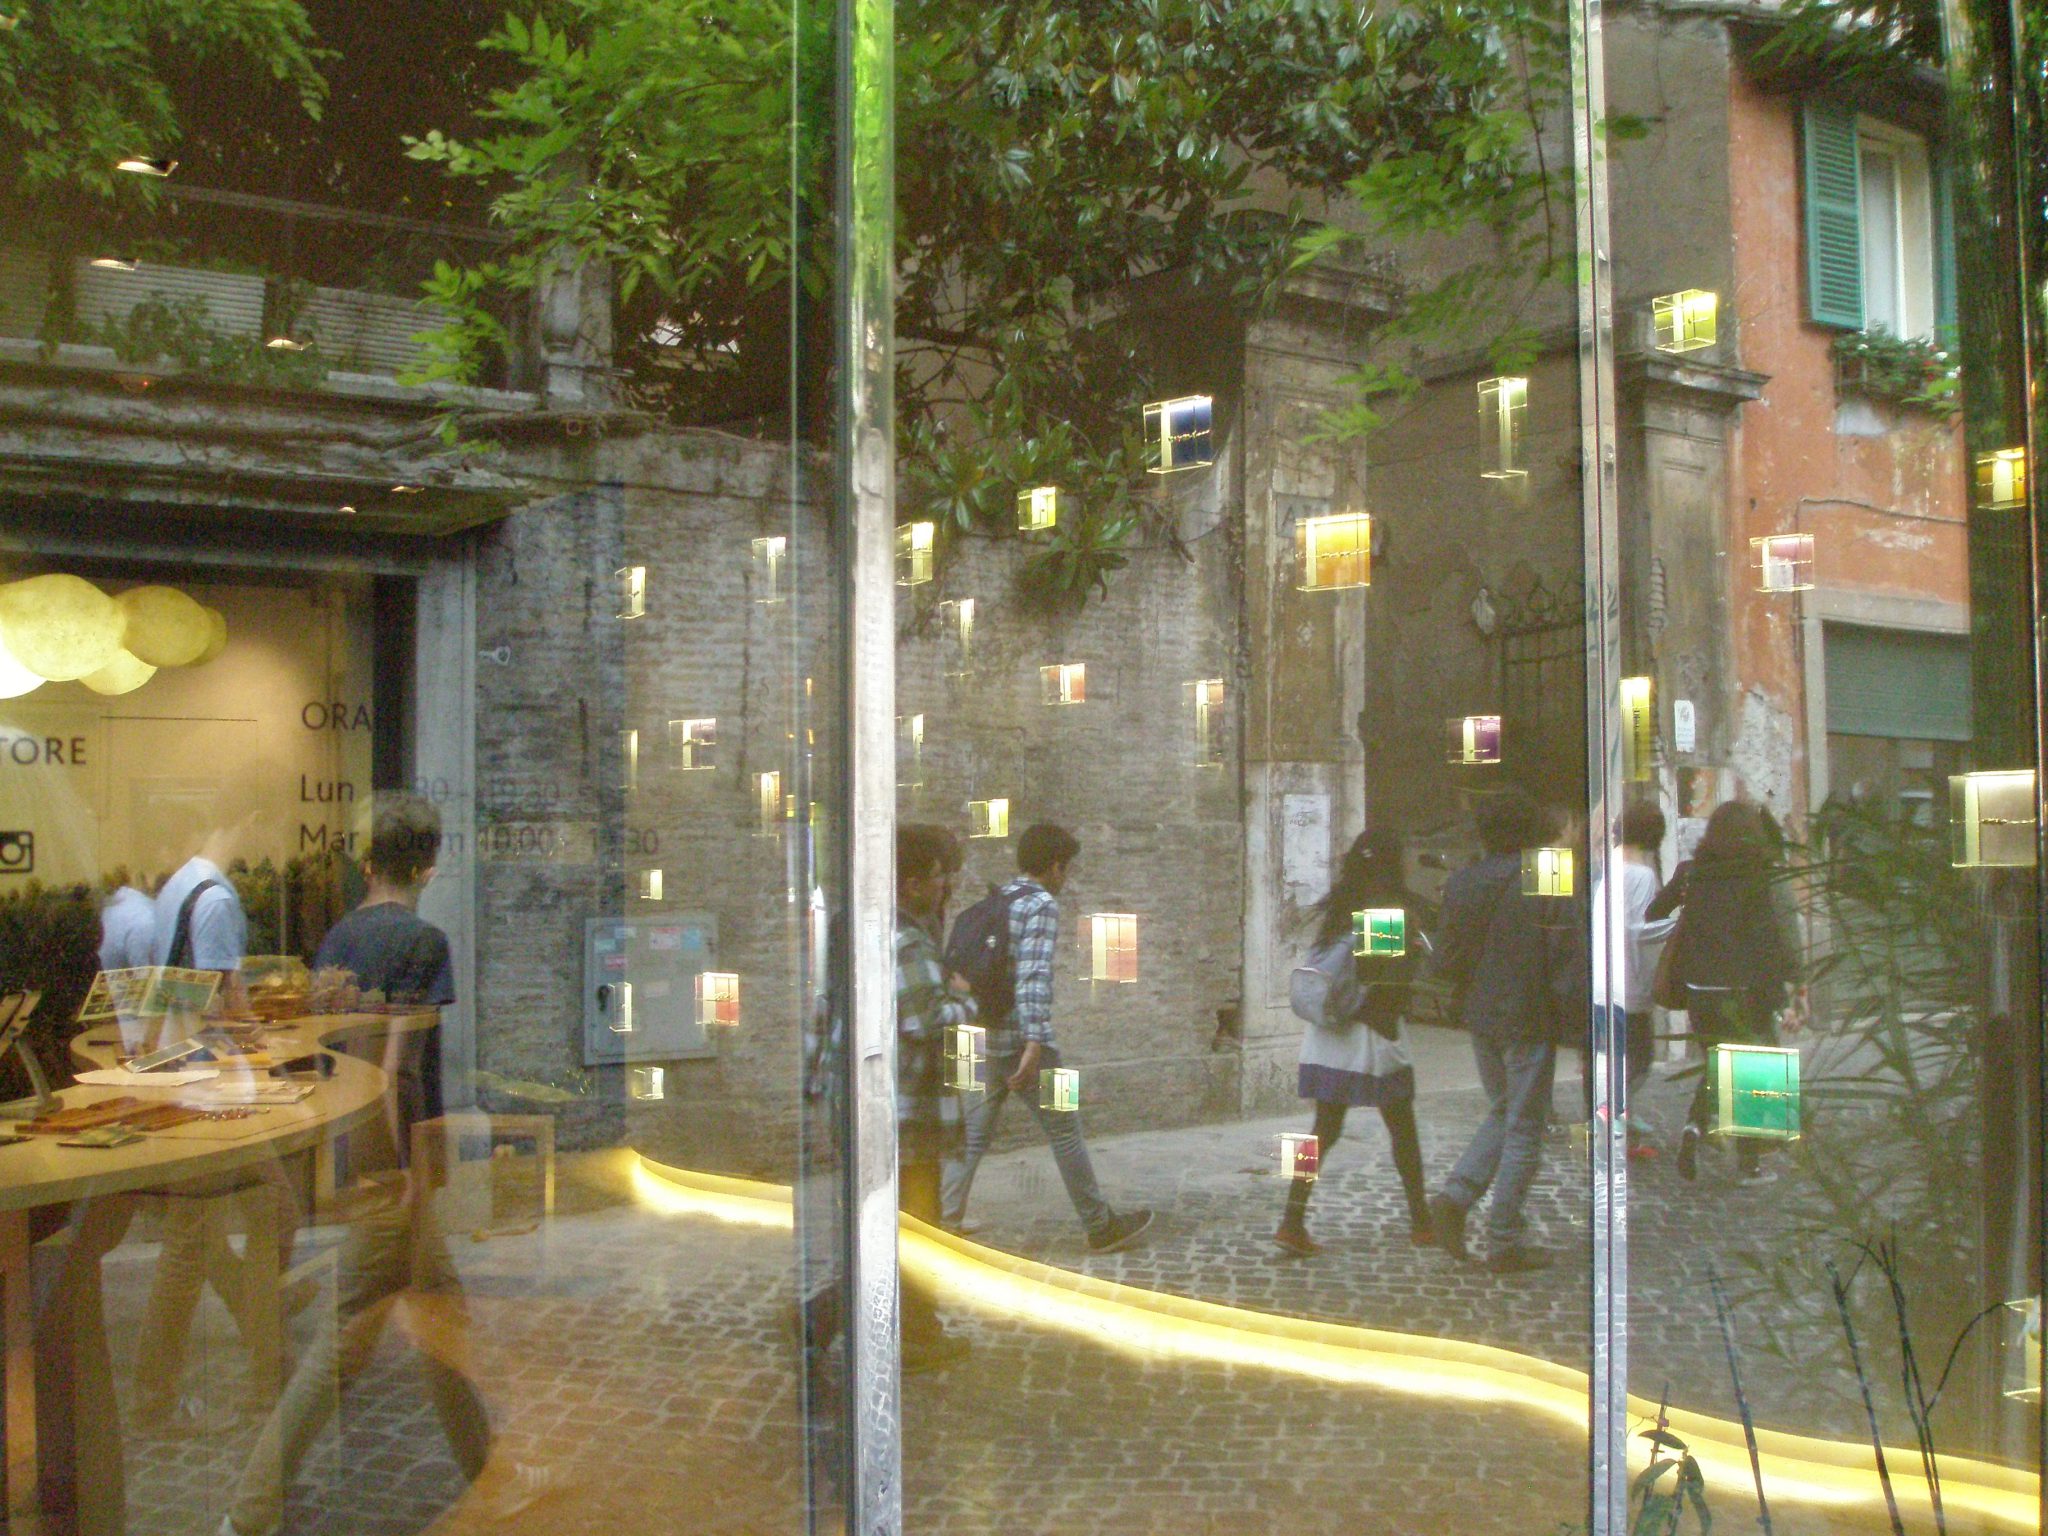 Mesmerizing reflections on the windows of a Via Margutta boutique.